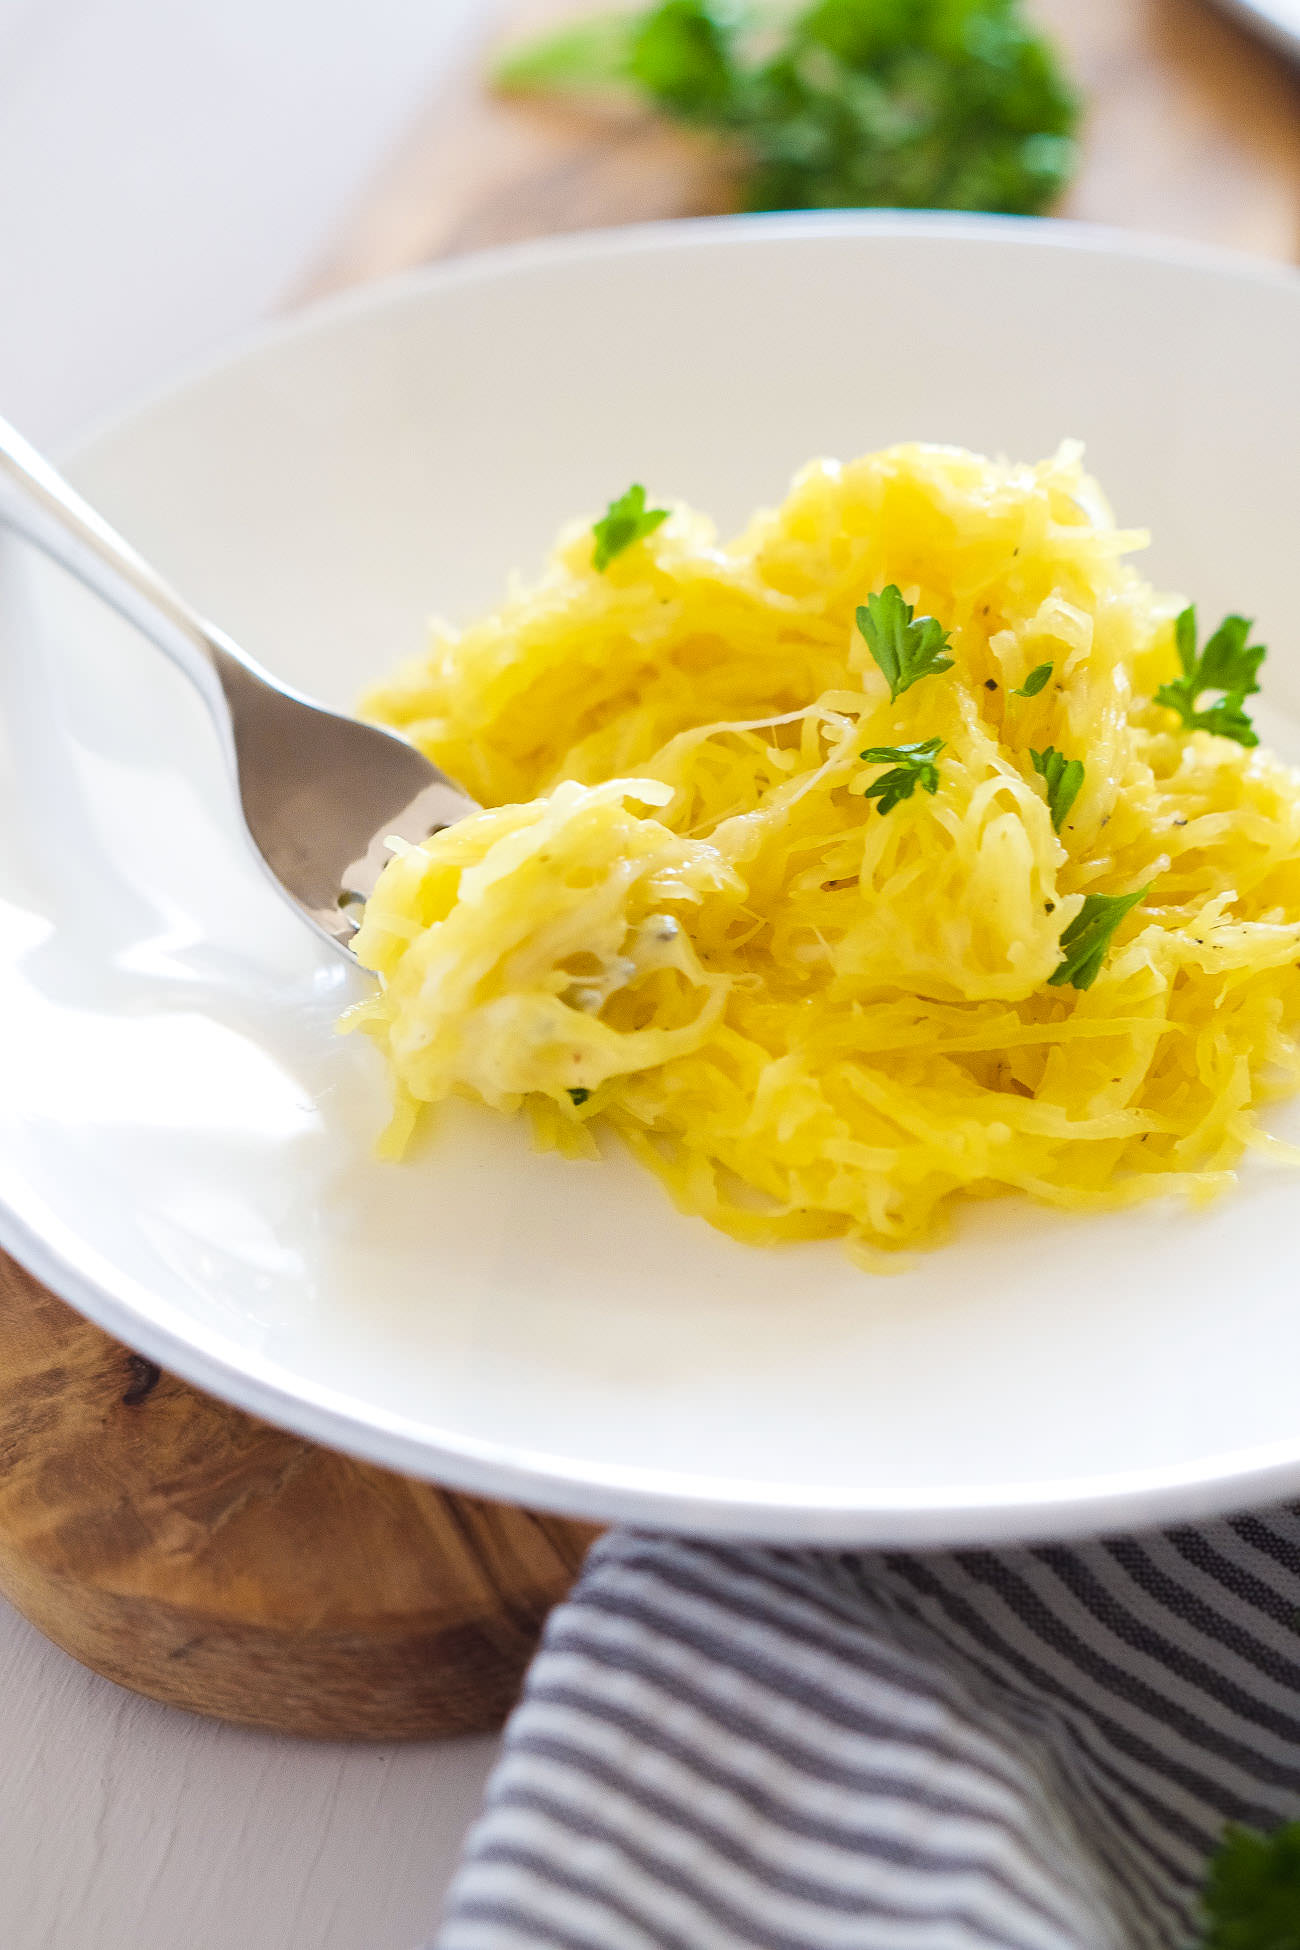 Garlic Brown Butter Spaghetti Squash is quick and healthy side dish that is super cheesy and tossed in nutty garlicky browned butter! One bite and you won't believe how light it really is!